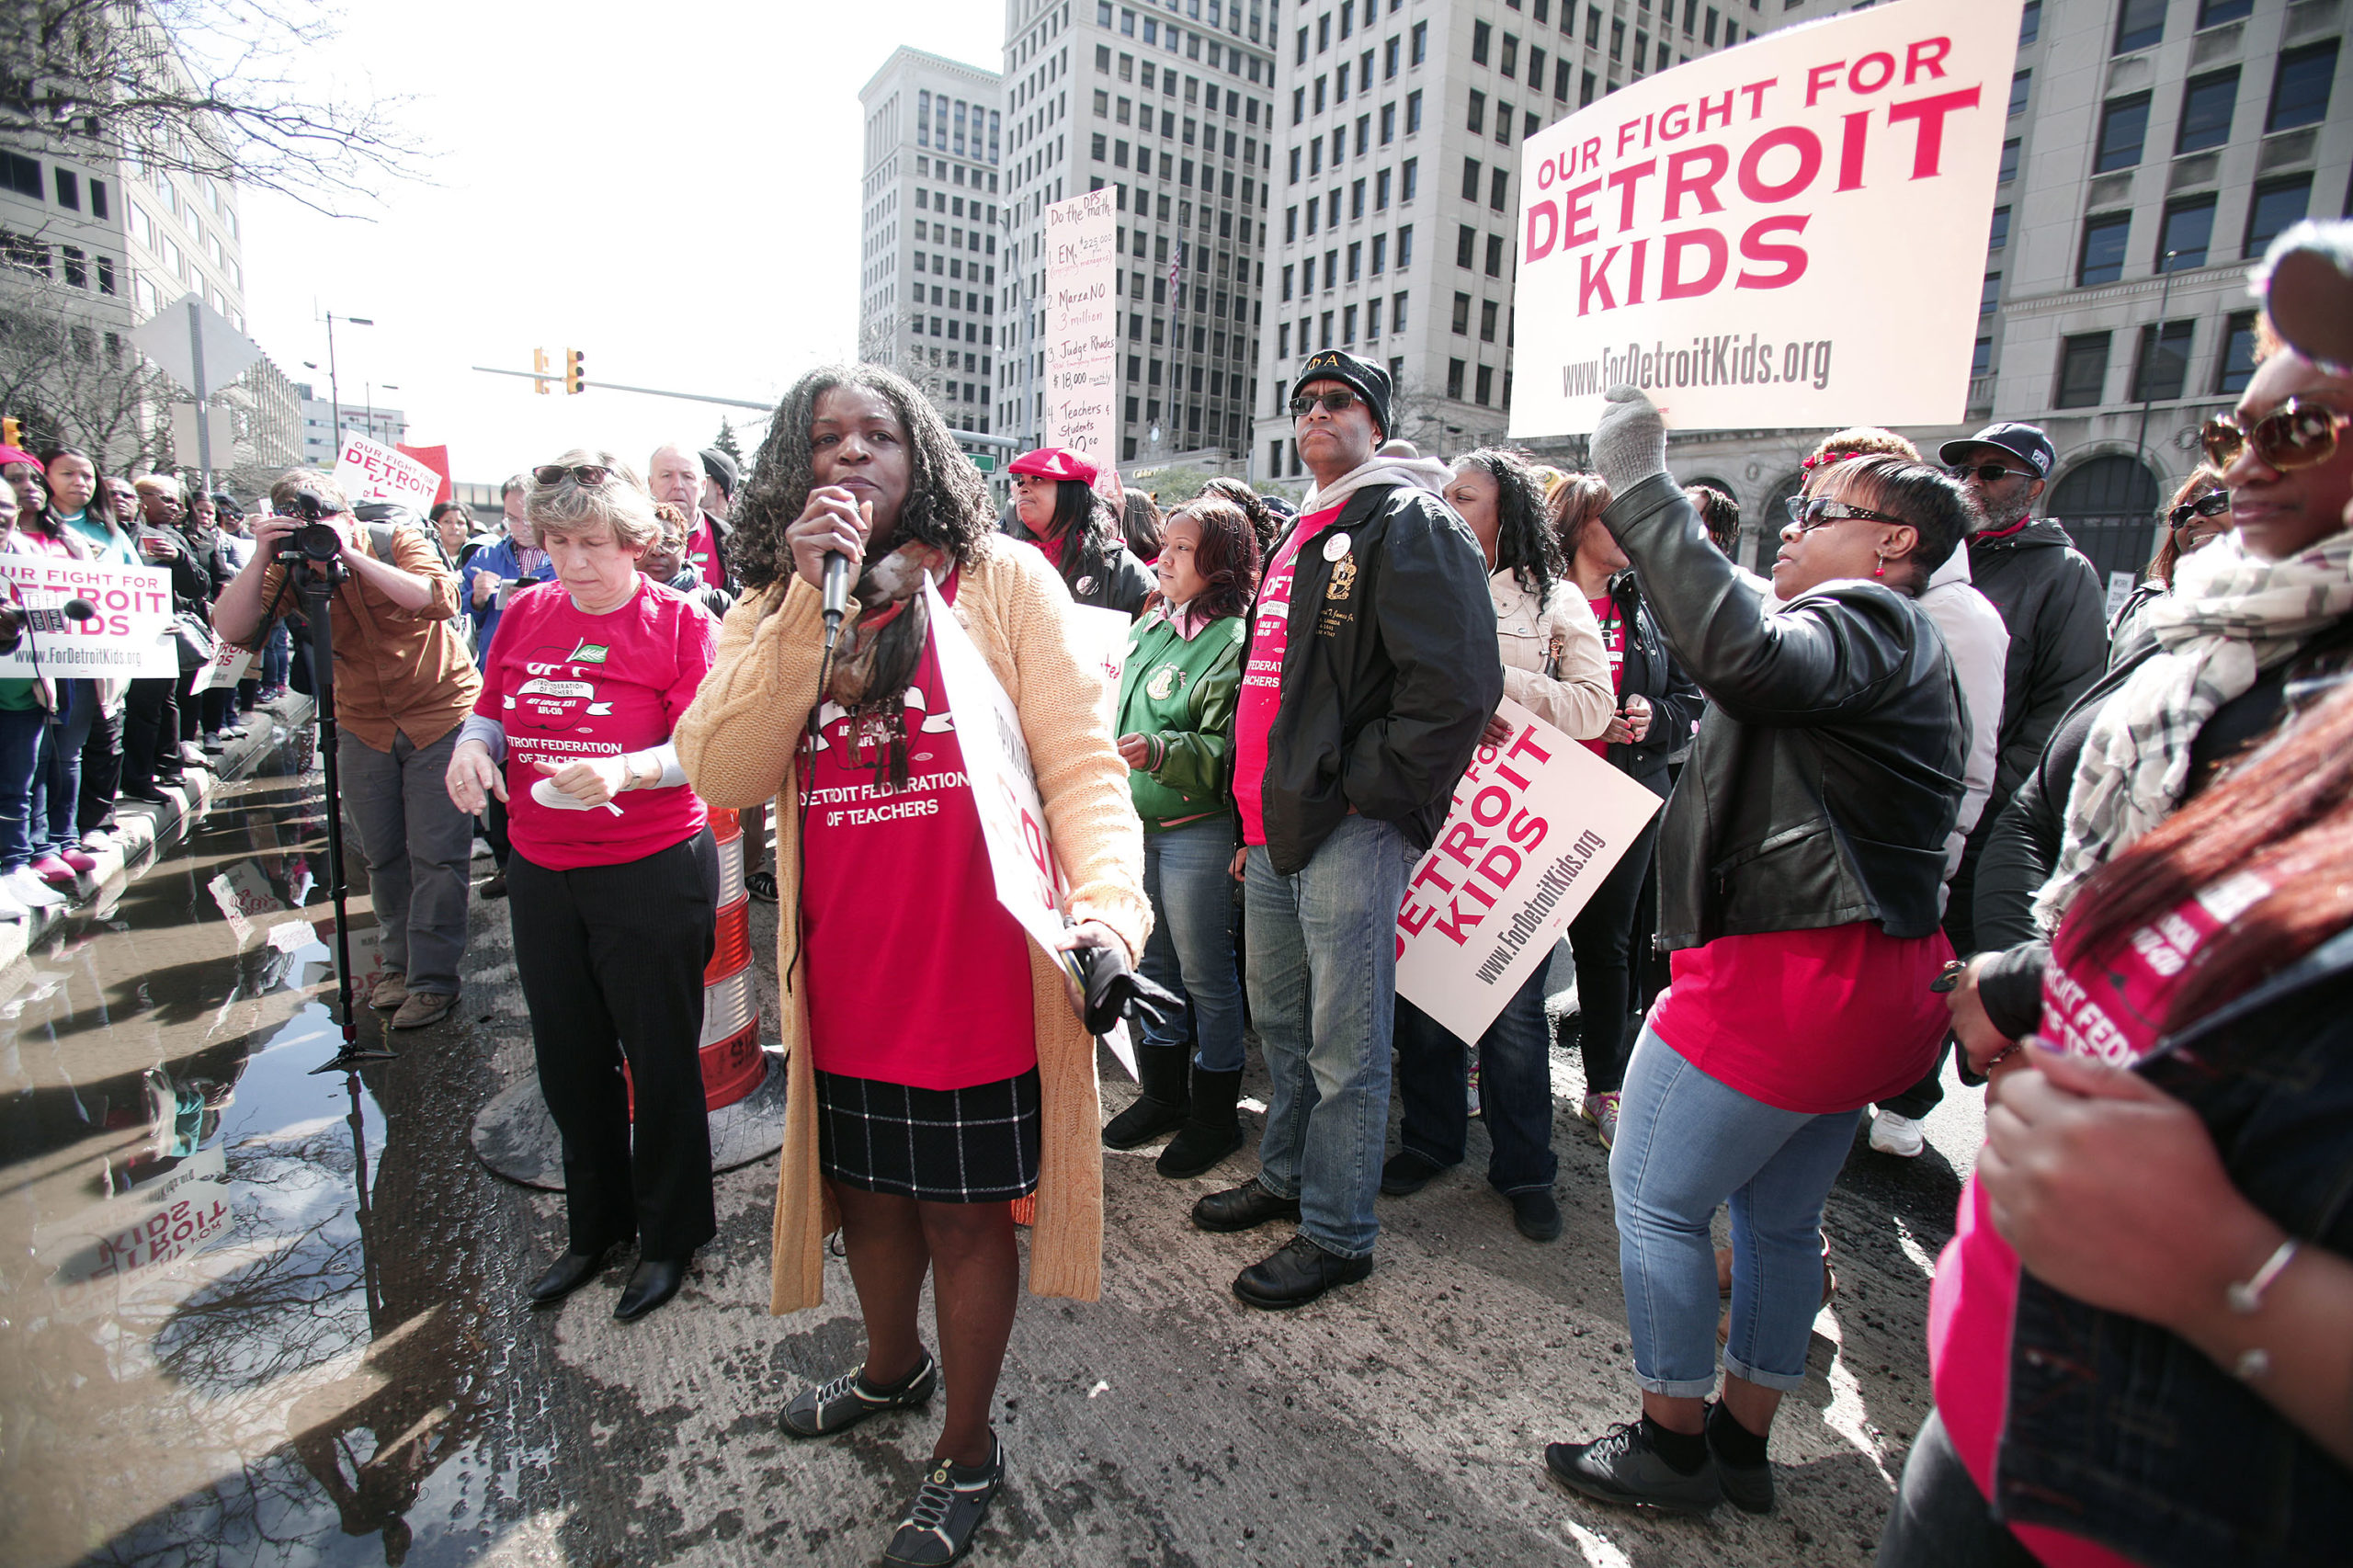 Ivy Bailey, interim President of the Detroit Federation of Teachers, participates in a Detroit teachers sick-out, the second in the past two days, and protests in front of Detroit Public Schools headquarters, May 3, 2016 in Detroit, Michigan. The sick-out forced the closing of 94 of 97 Detroit school districts today. The teachers are looking for a guarantee that they will be paid for the work they perform. (Photo by Bill Pugliano/Getty Images)